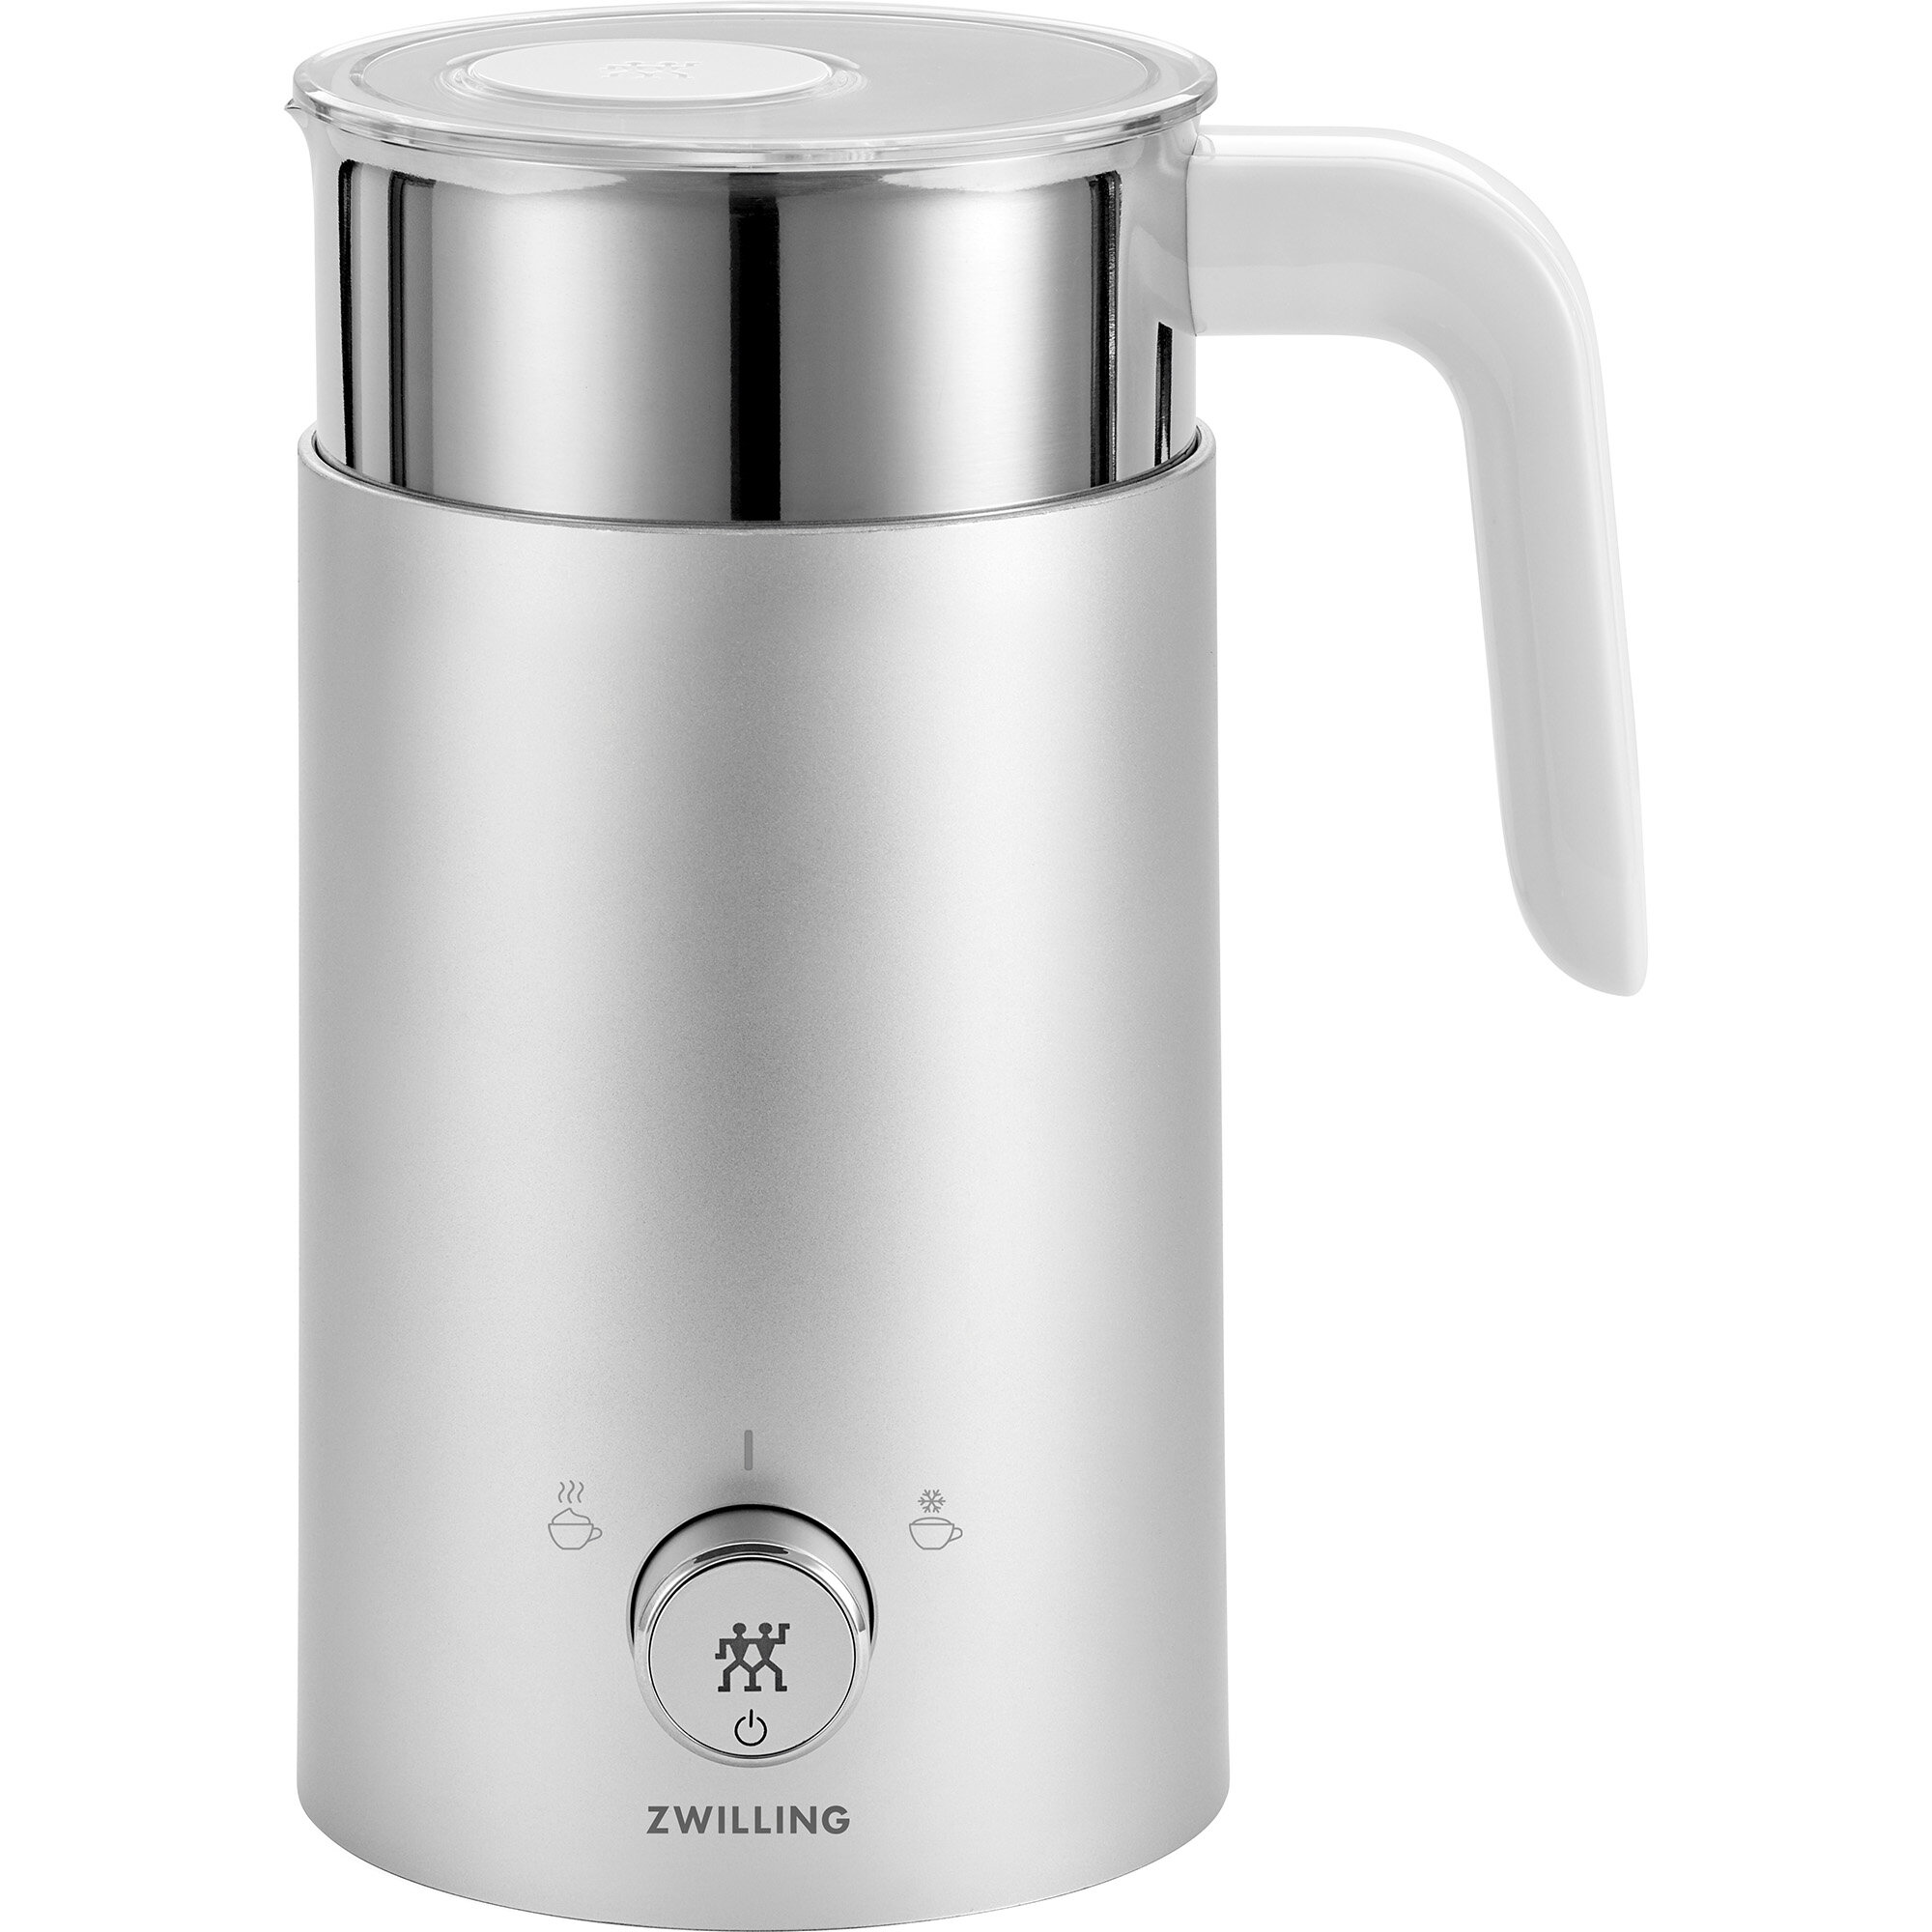 DALELEE Stainless Steel Automatic Milk Frother